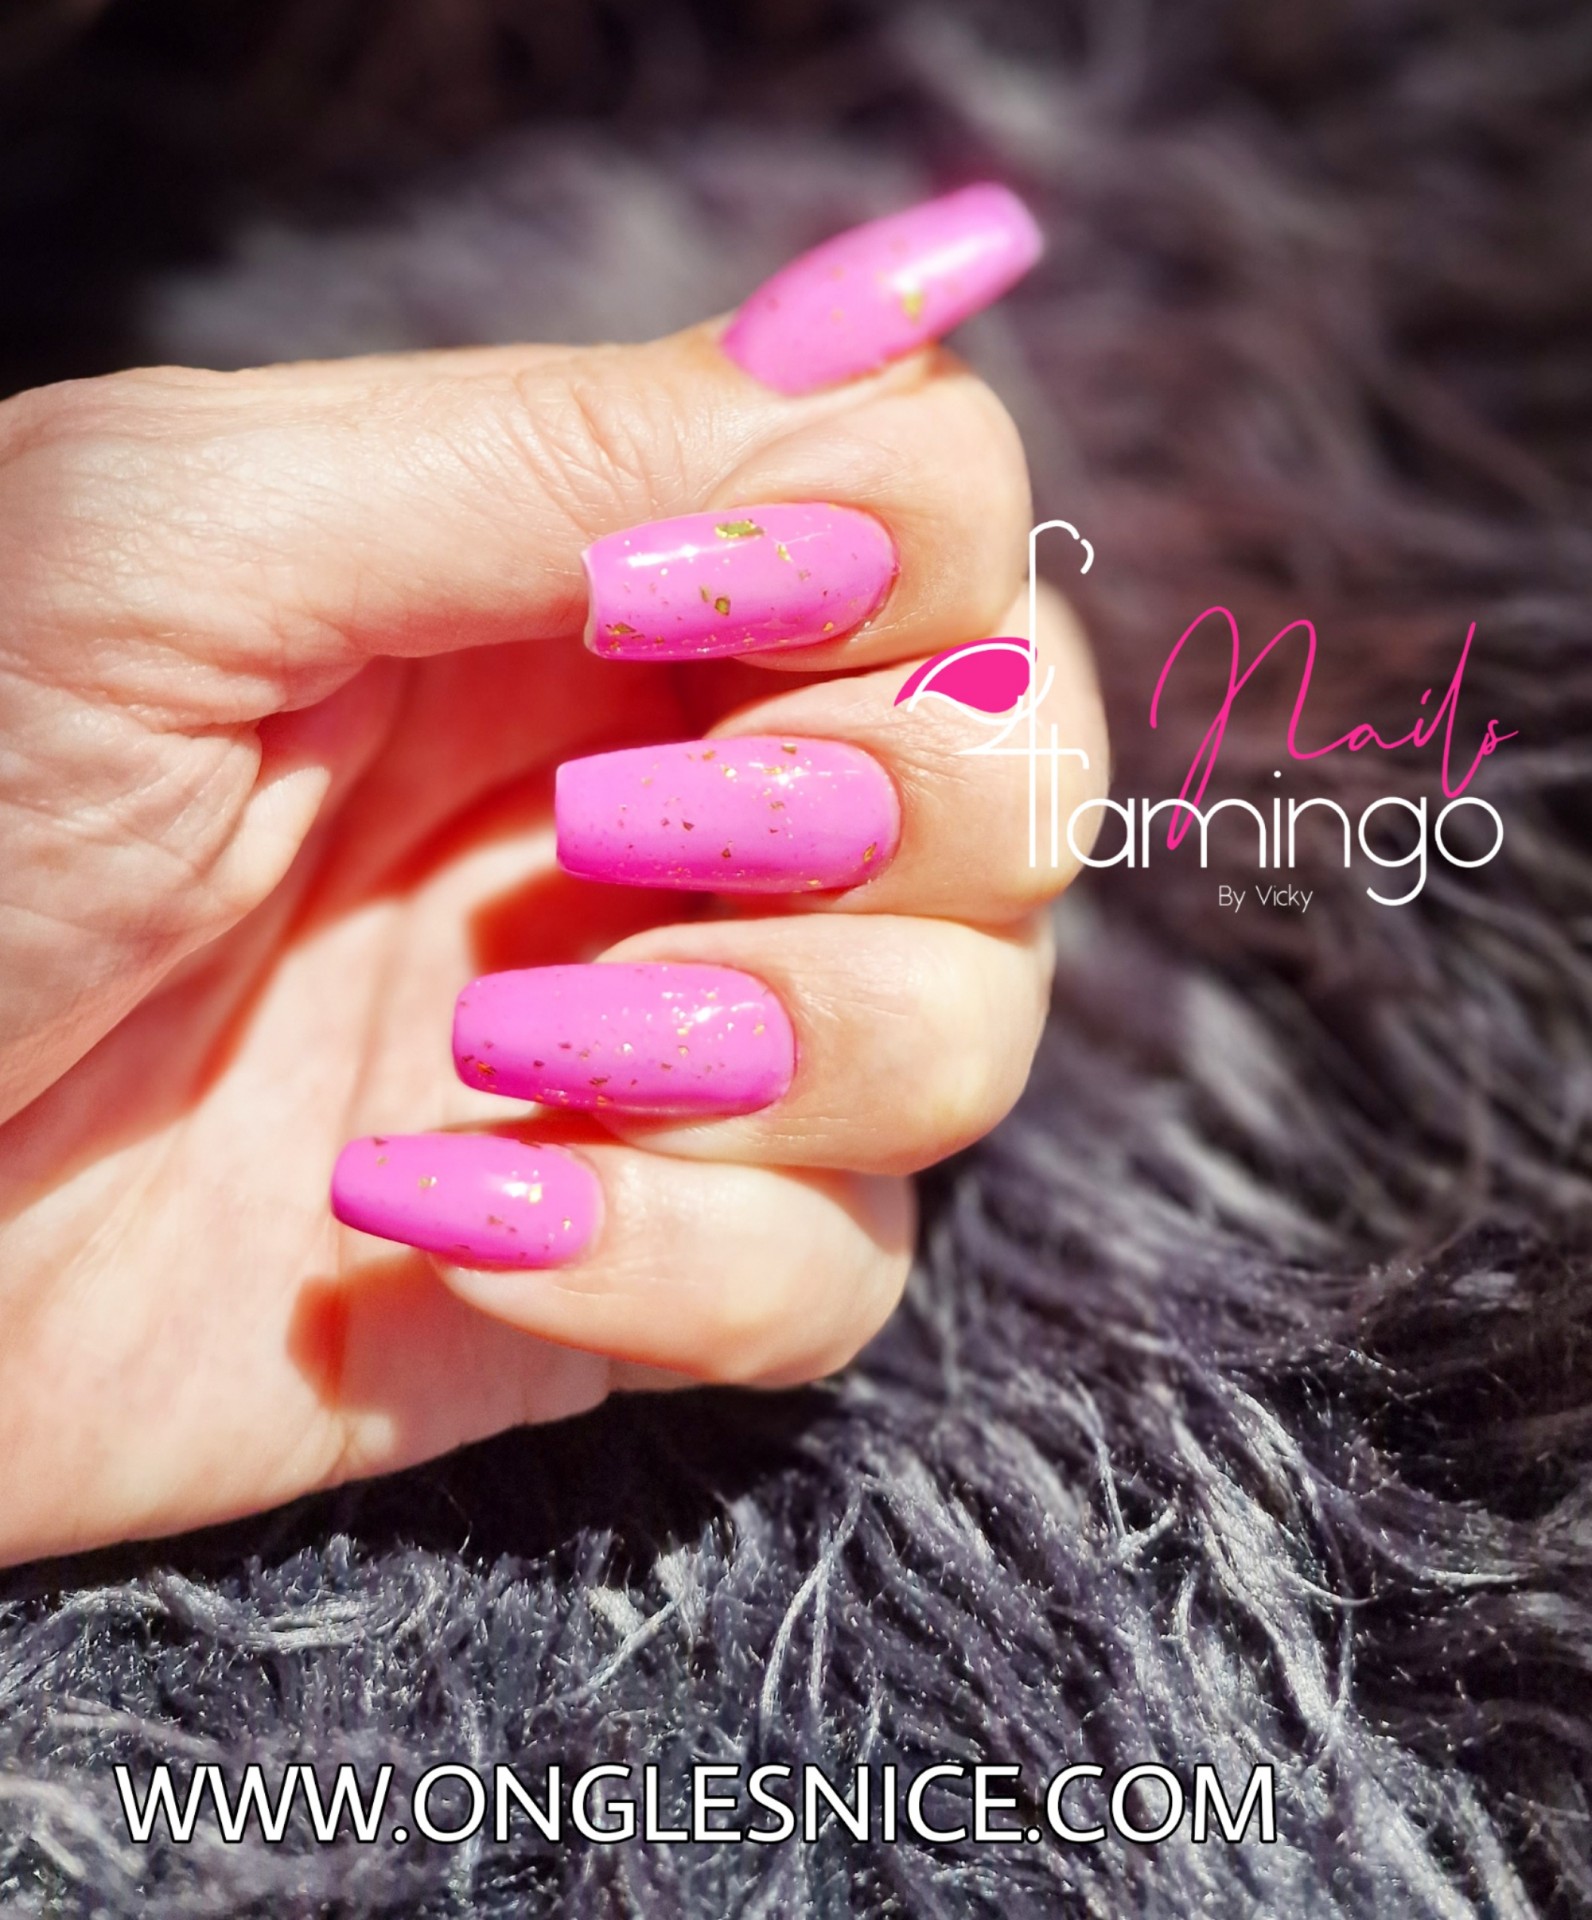 Faire ses ongles a nice